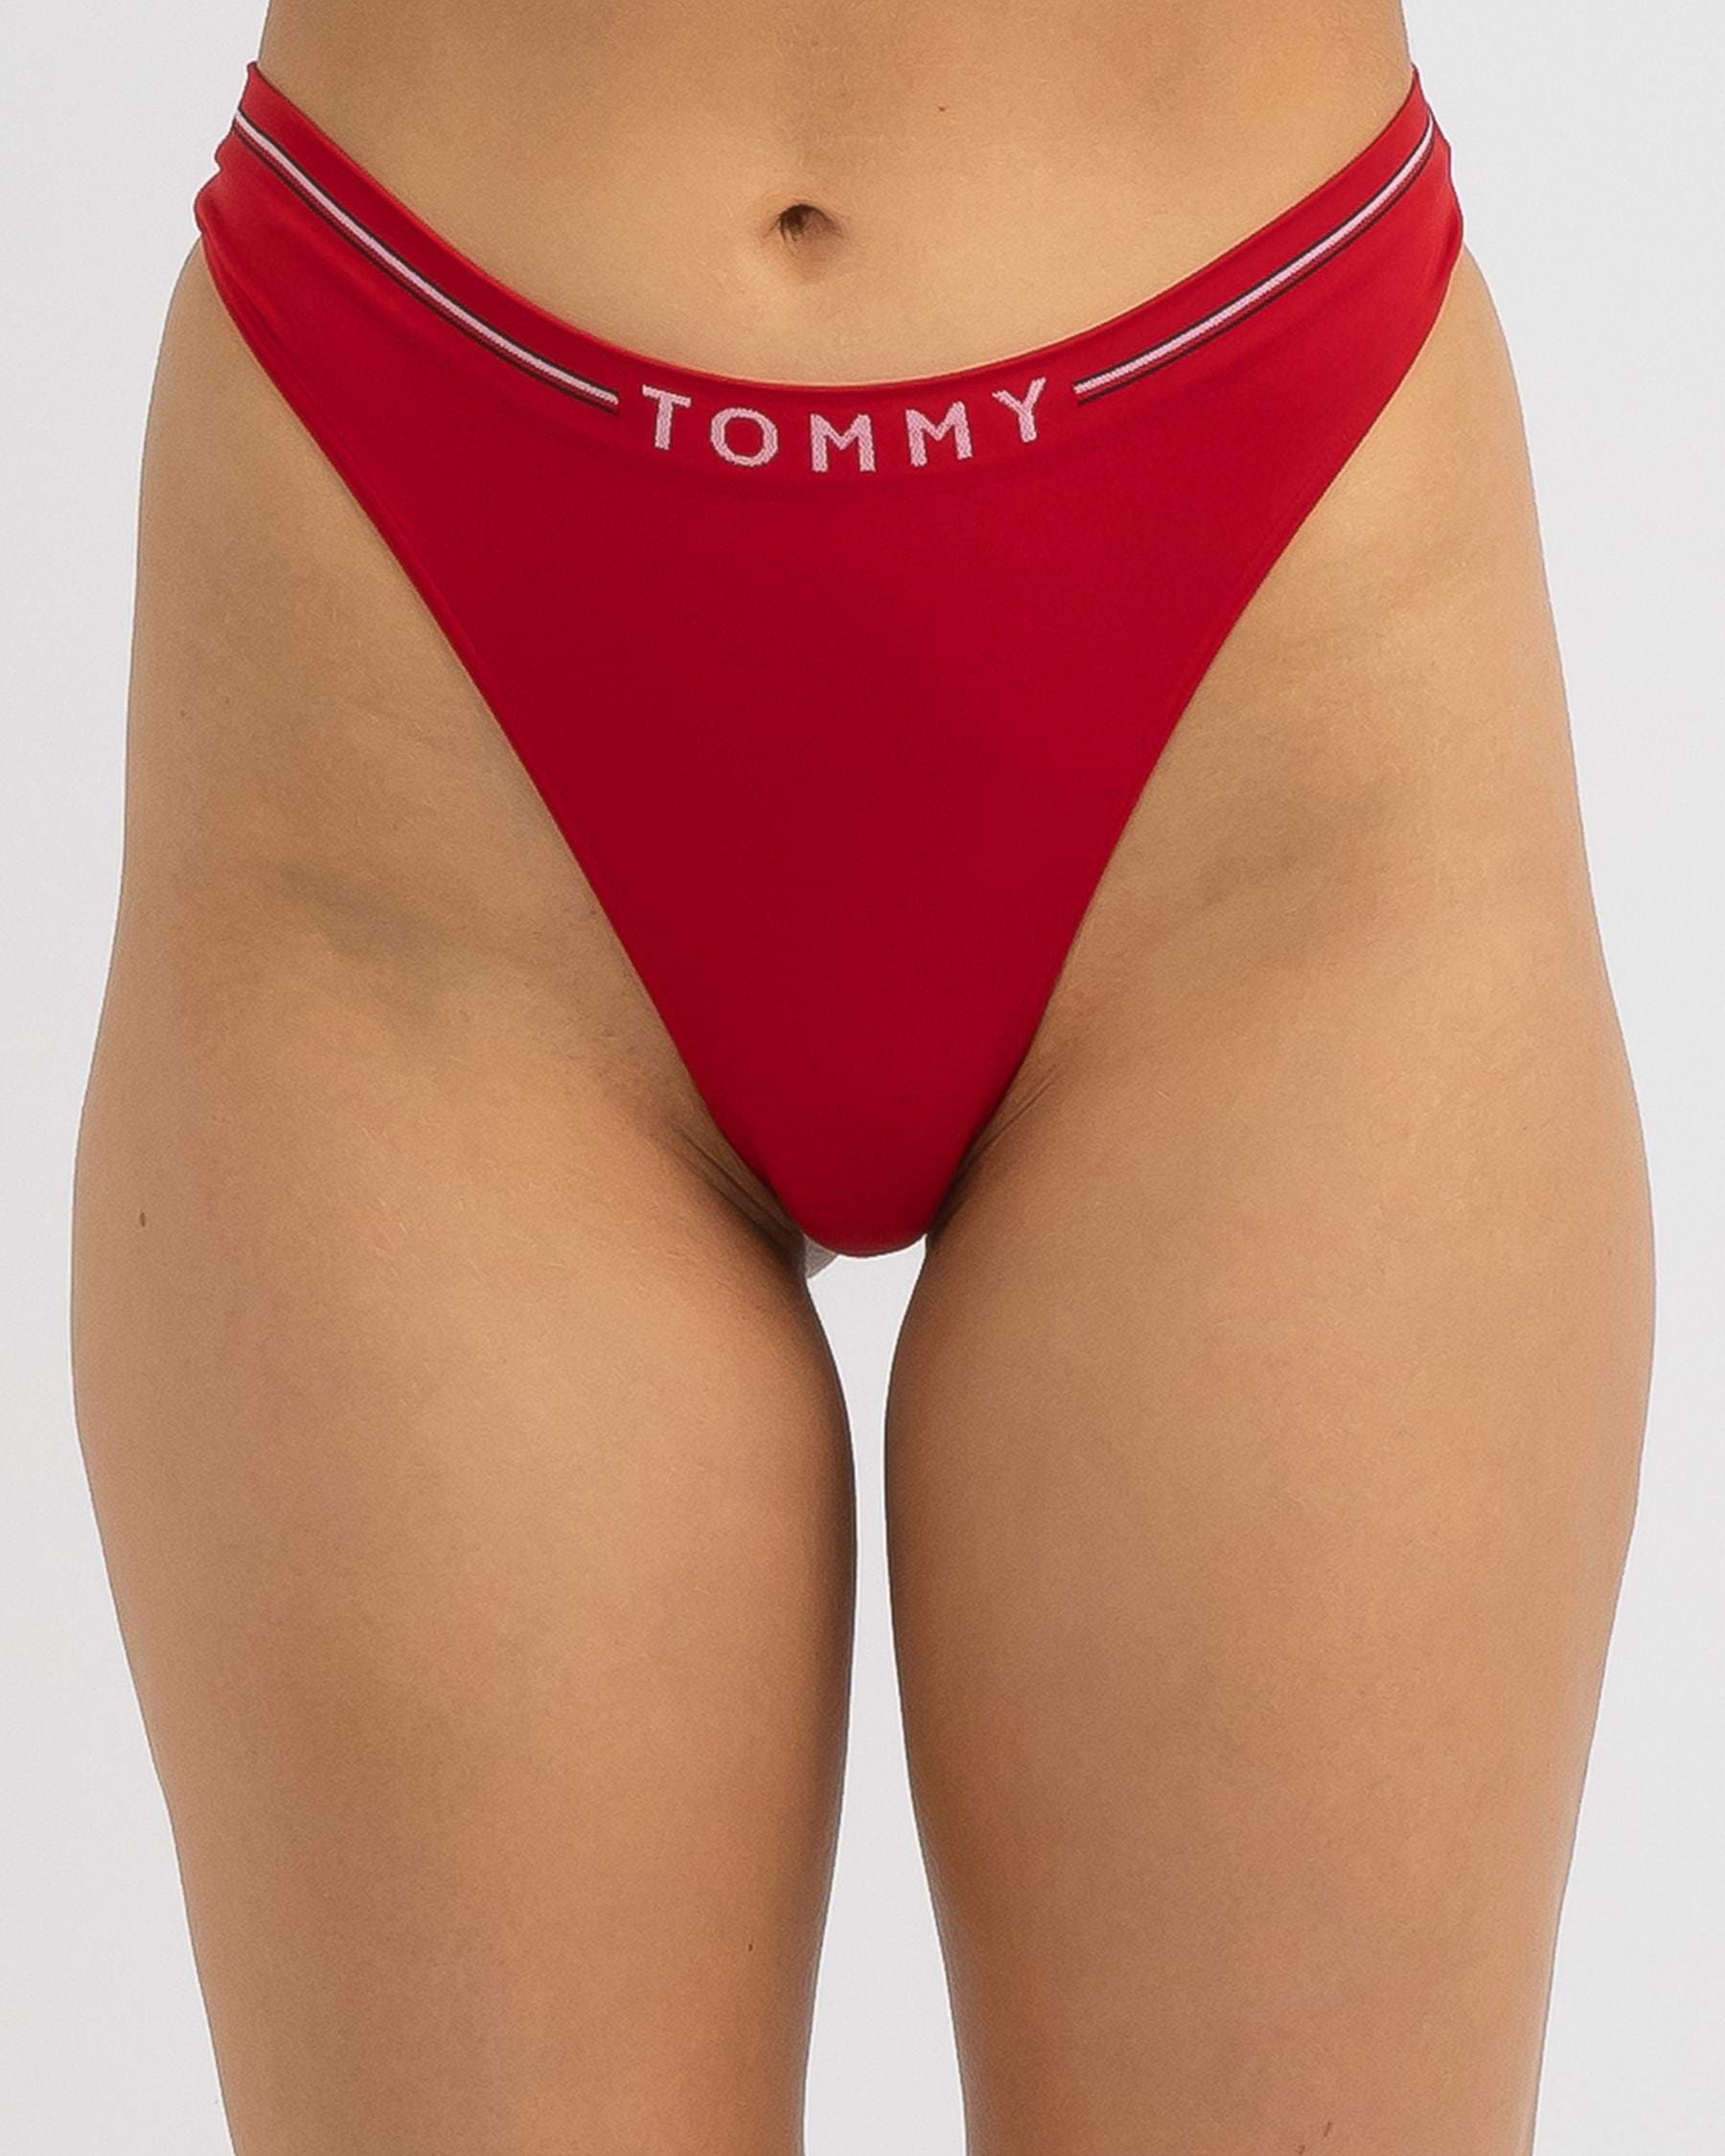 Tommy Hilfiger Seamless MW Thong In Primary Red - FREE* Shipping